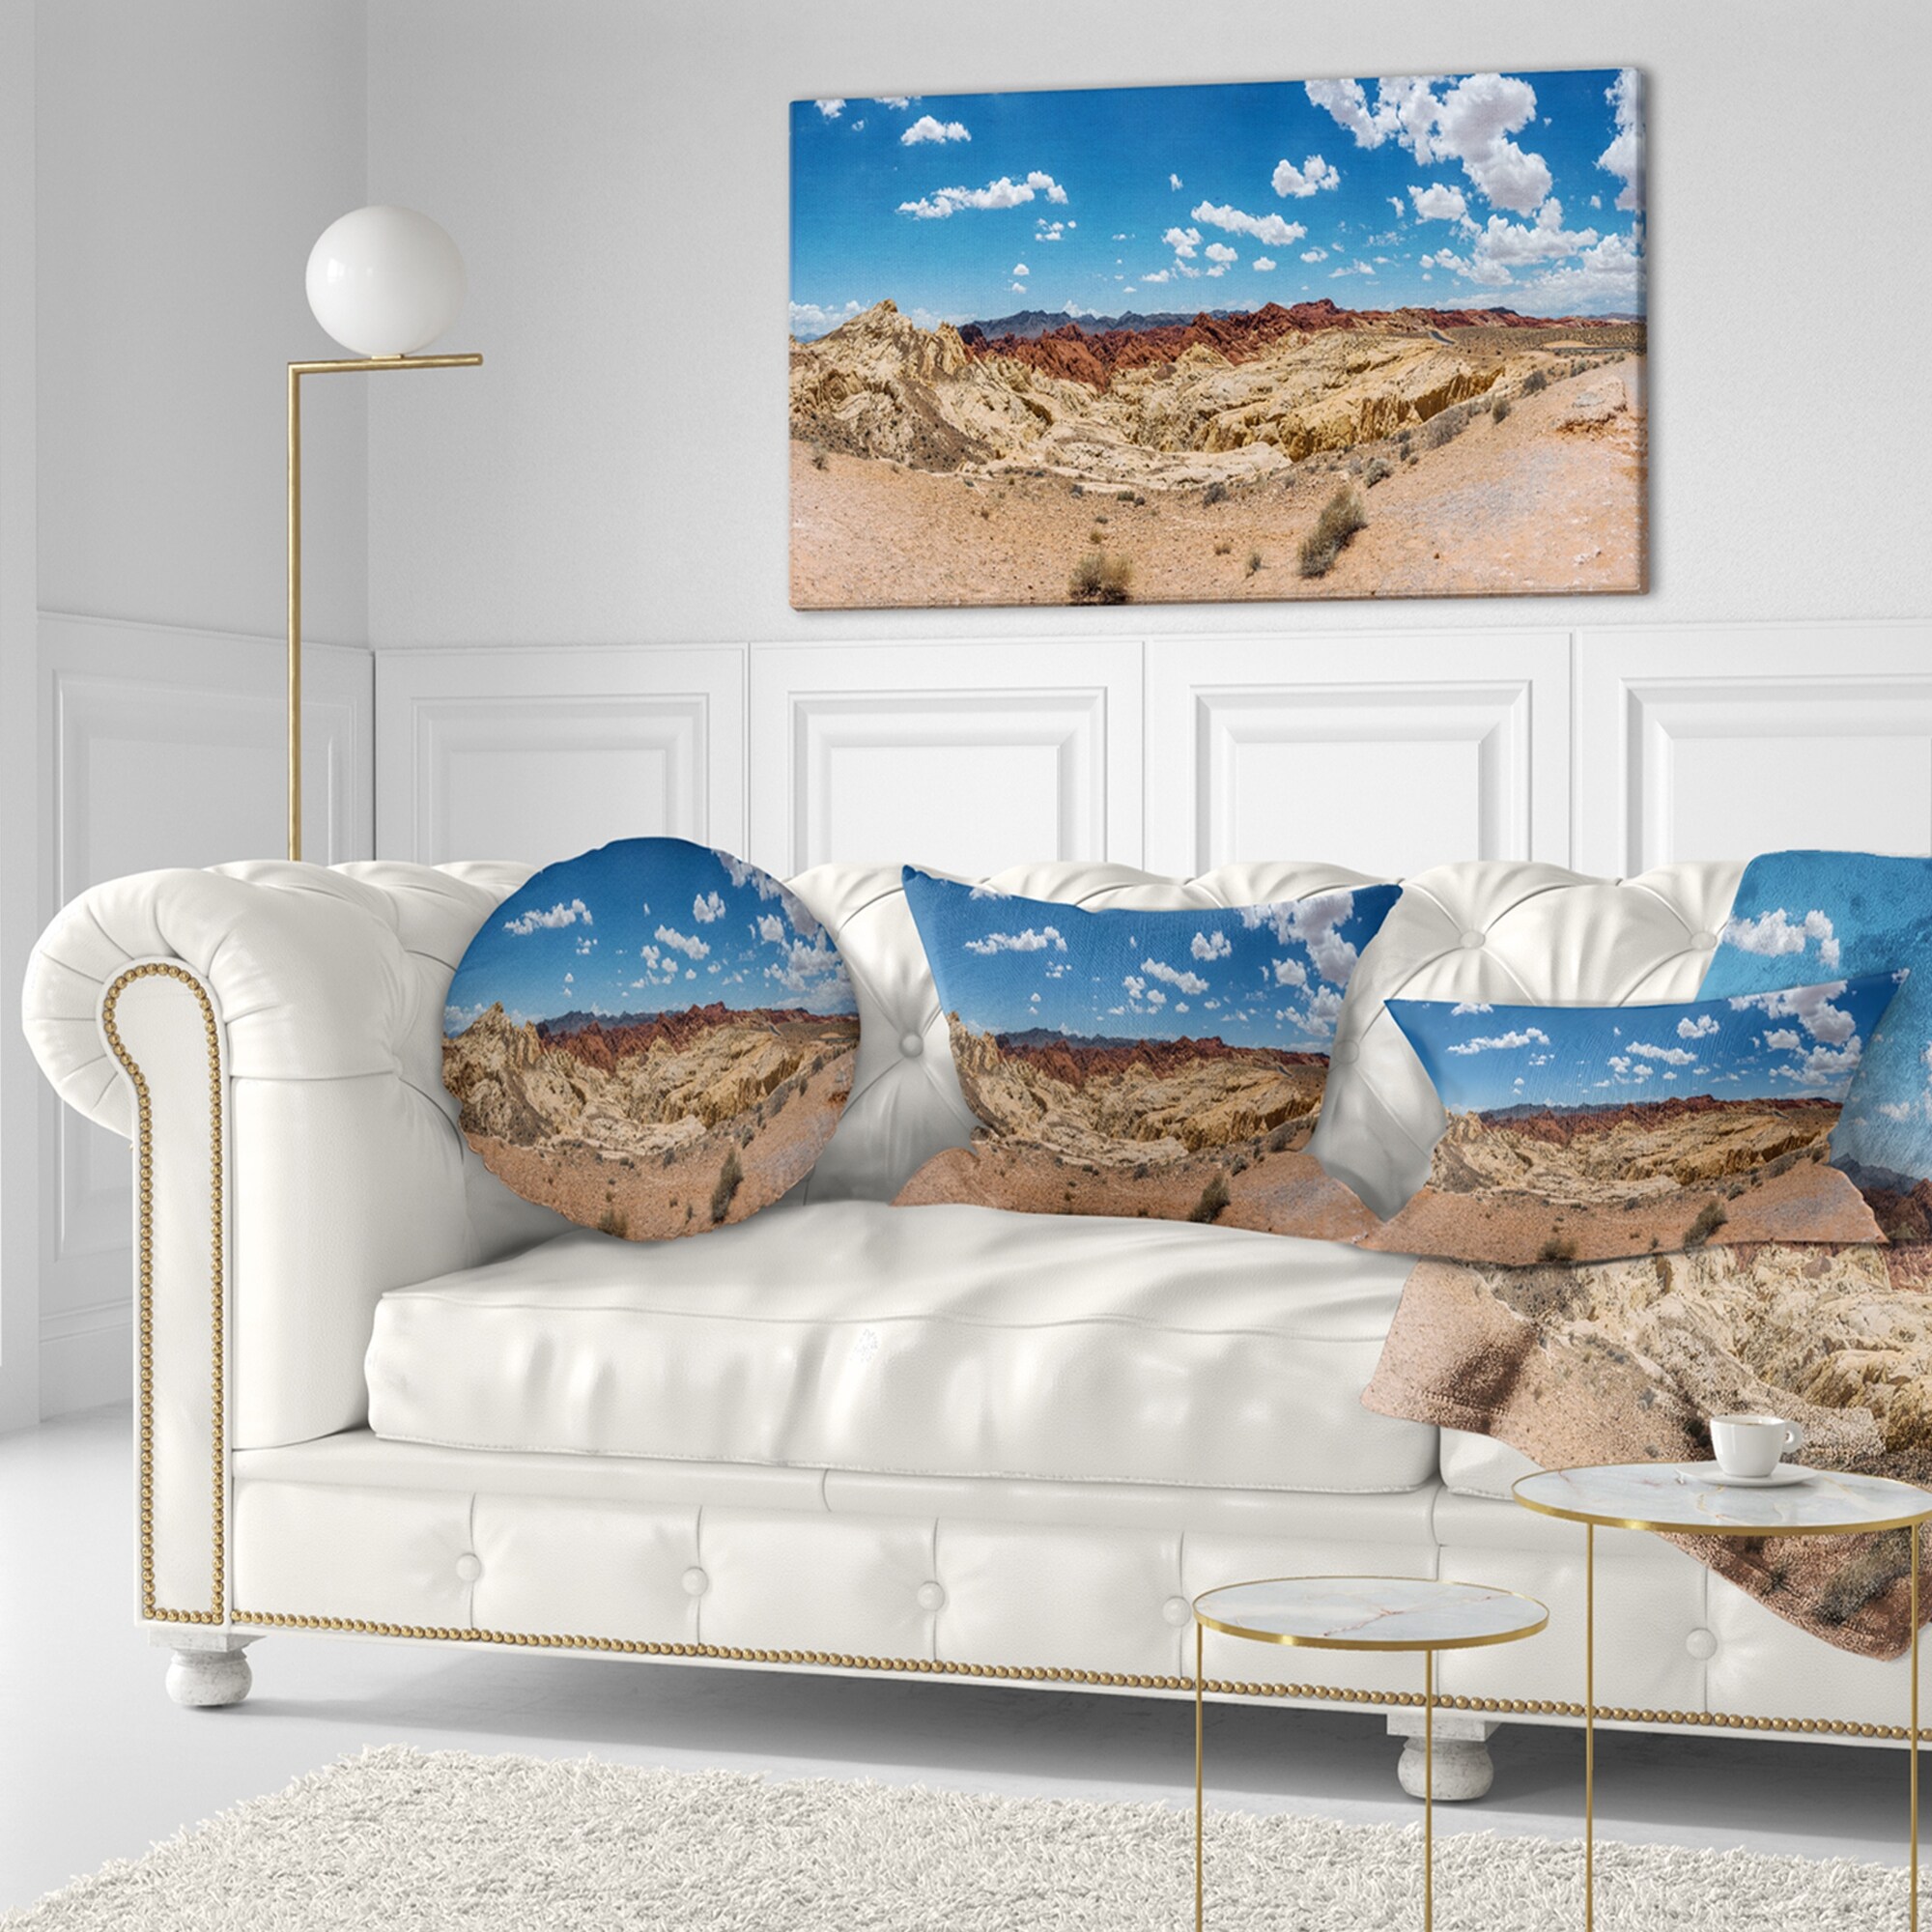 https://ak1.ostkcdn.com/images/products/is/images/direct/0306d5294182ca9f67b67579551dcebc28604acb/Designart-%27Valley-of-Fire-Landscape-Panorama%27-Landscape-Canvas-Art-Print.jpg